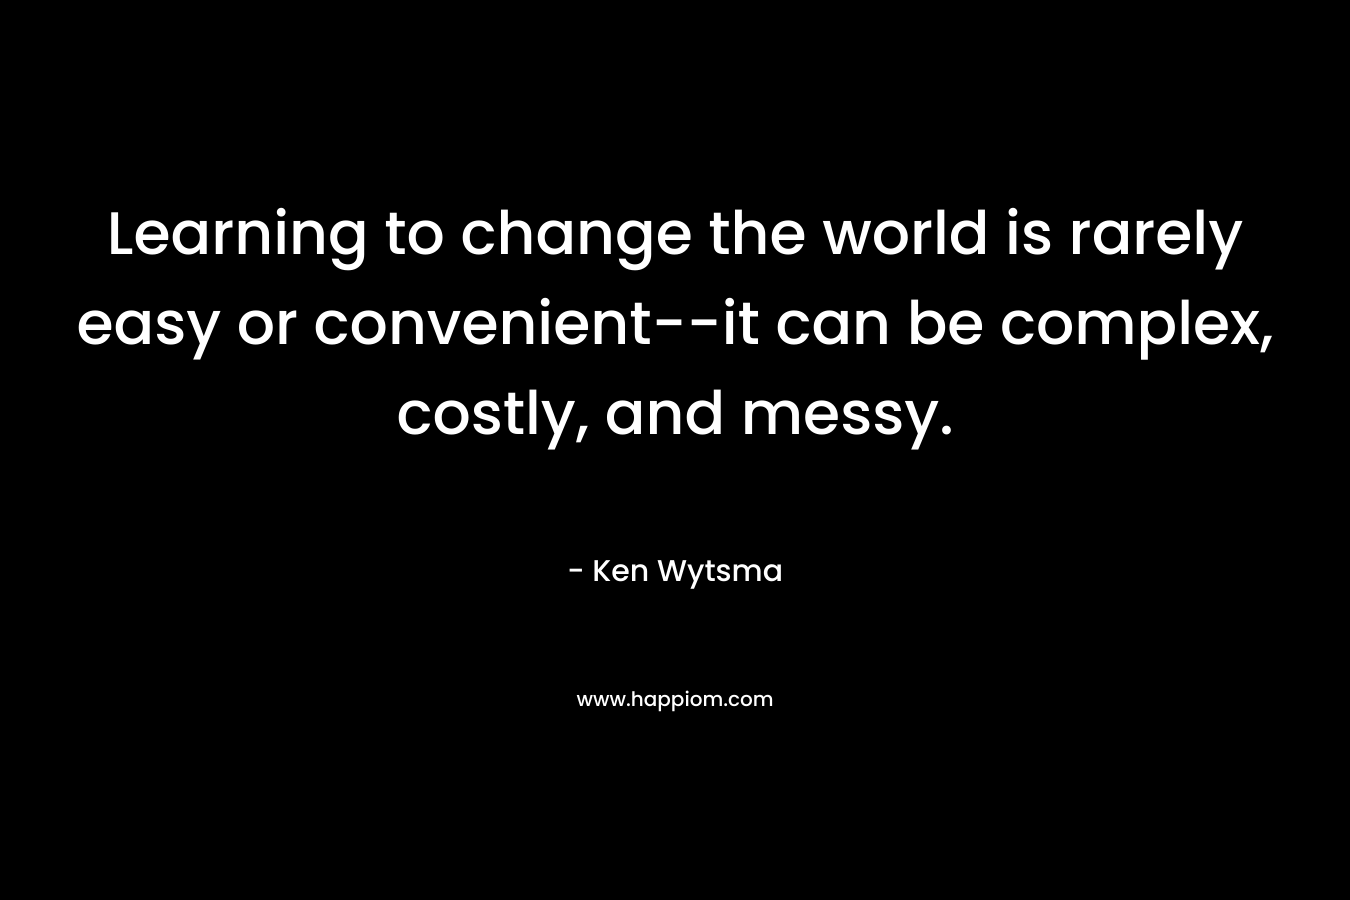 Learning to change the world is rarely easy or convenient--it can be complex, costly, and messy.